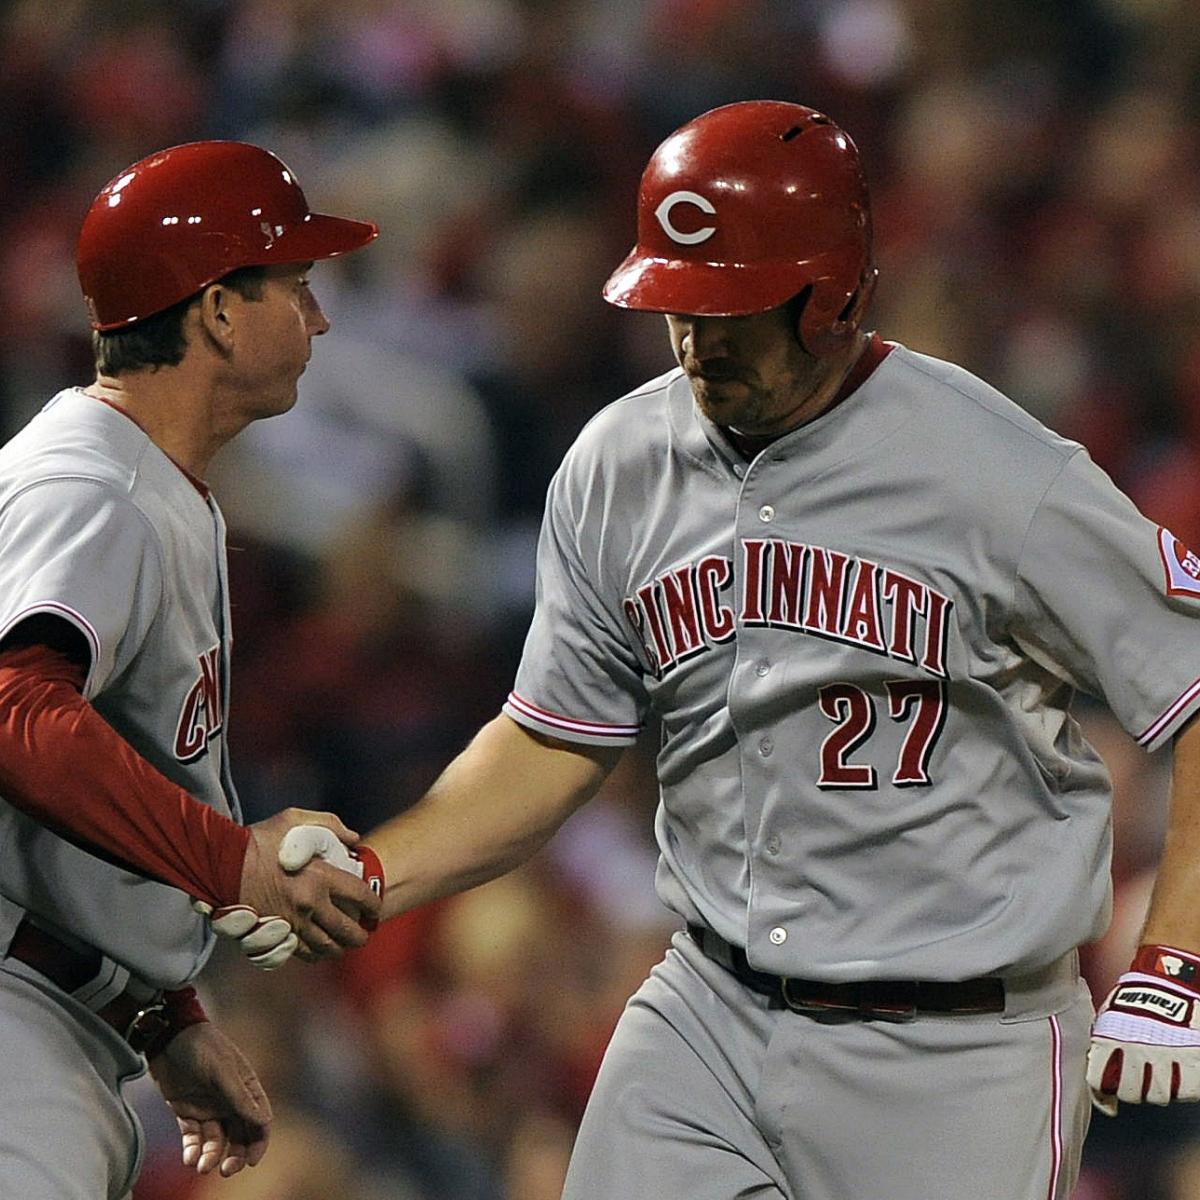 The Reds bring the swagger - and a fast start - Redleg Nation